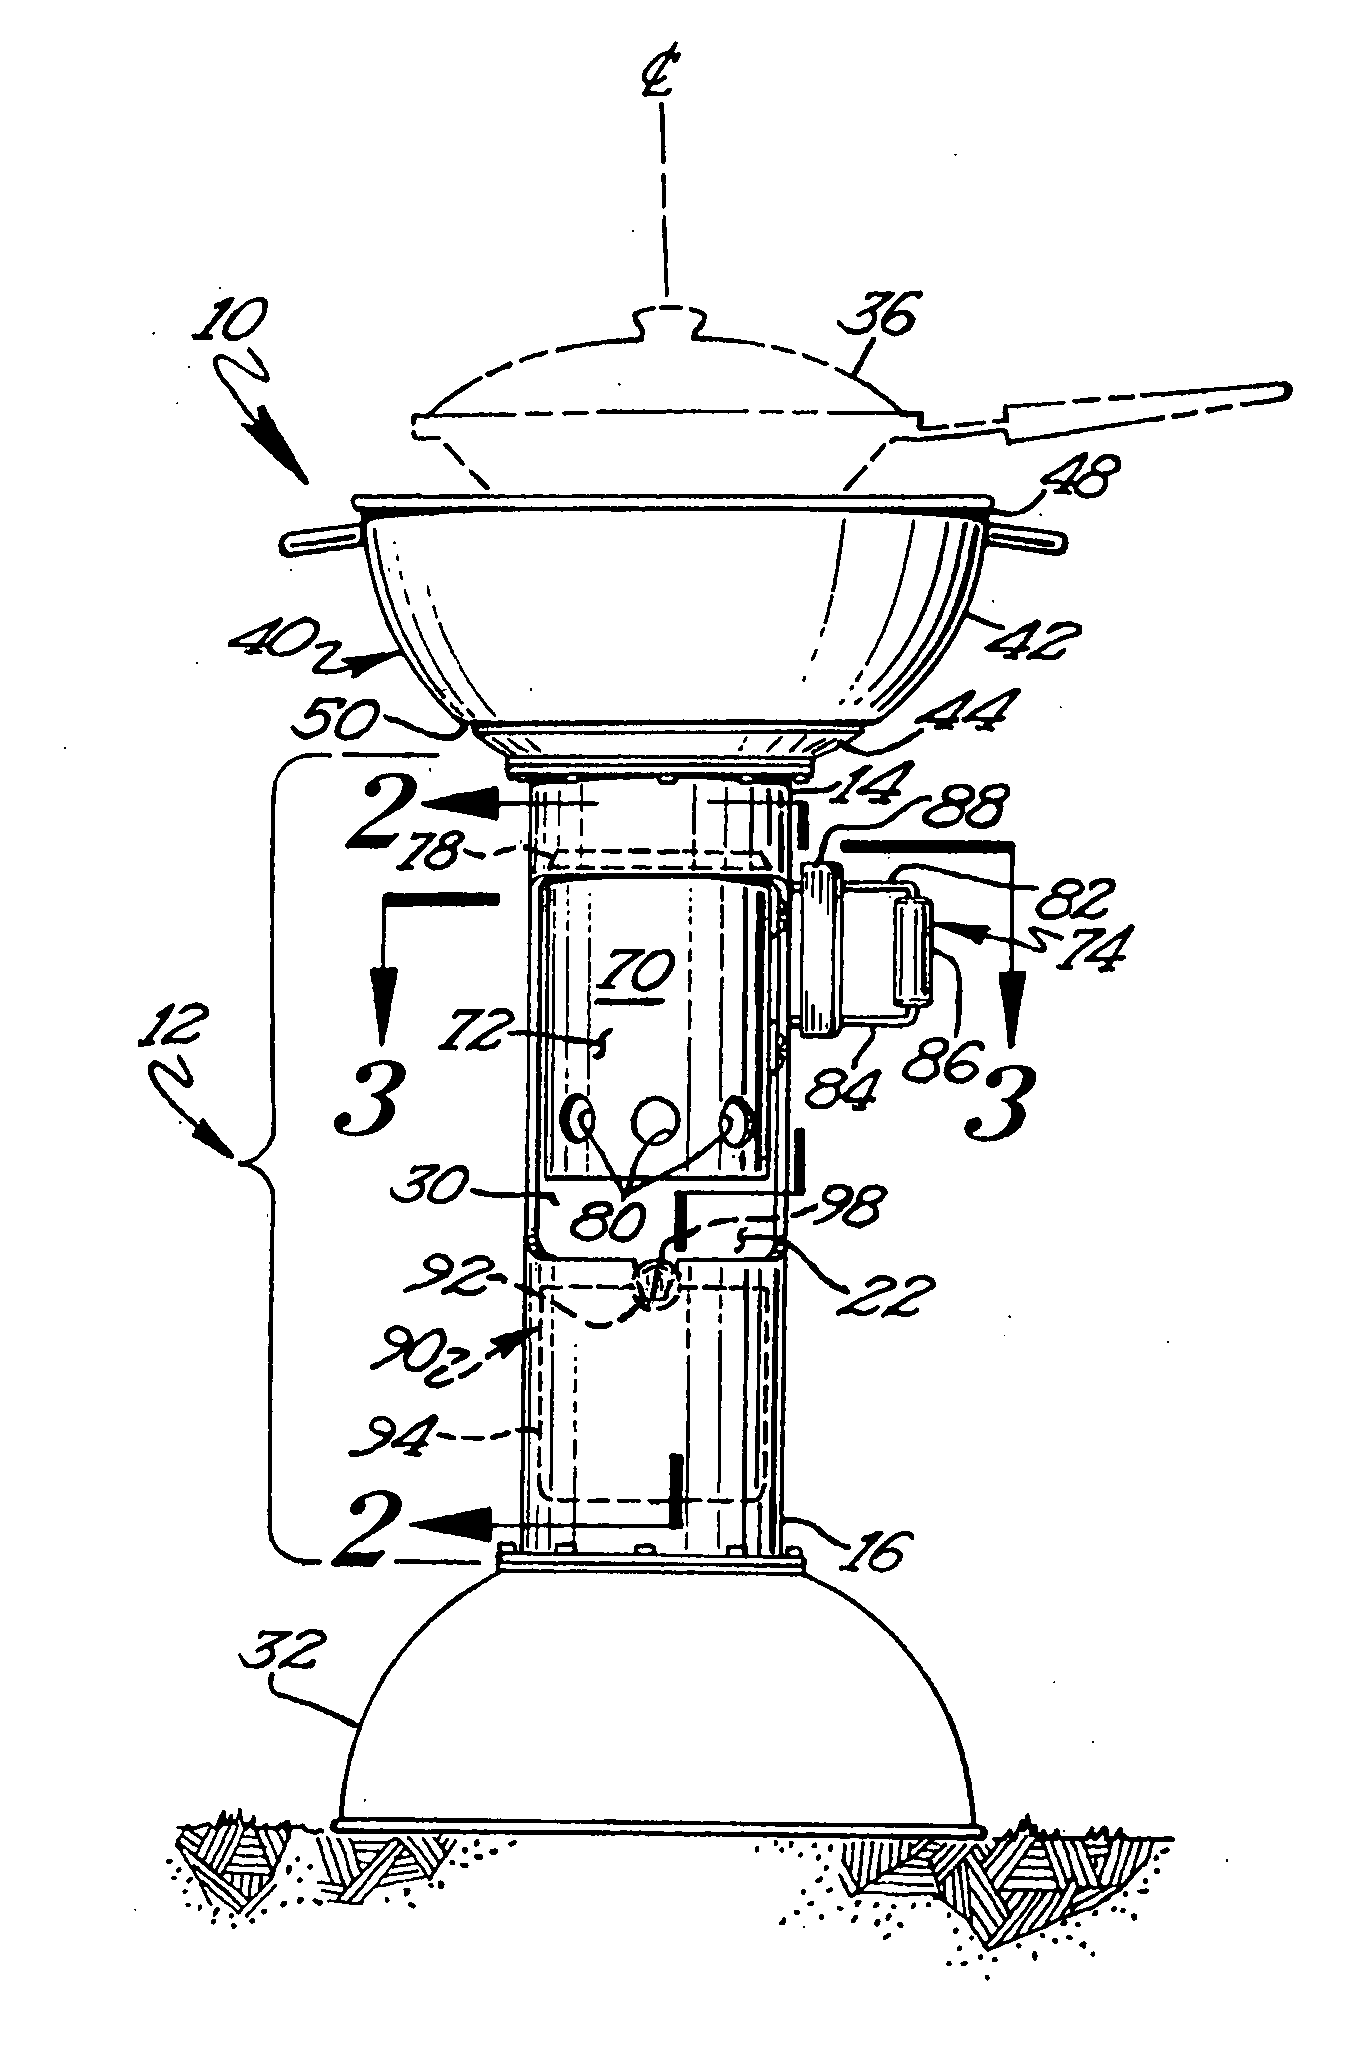 Cooking apparatus and methods of use